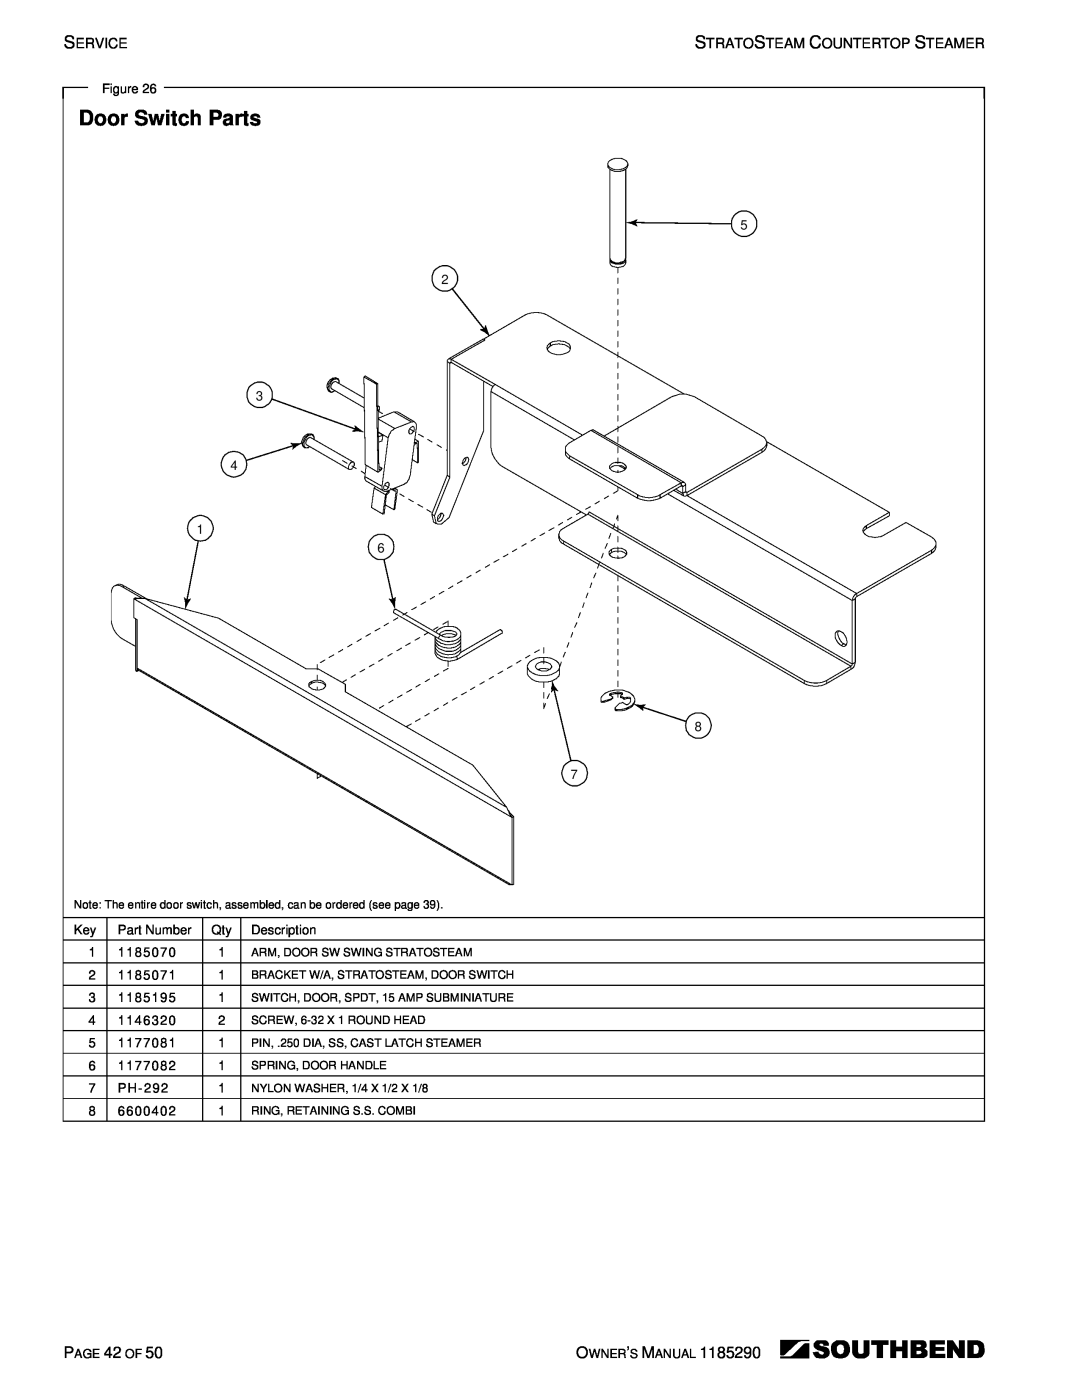 Southbend STRG-5D, STRG-3D manual Door Switch Parts, PIN, .250 DIA, SS, CAST LATCH STEAMER, PAGE 42 OF 